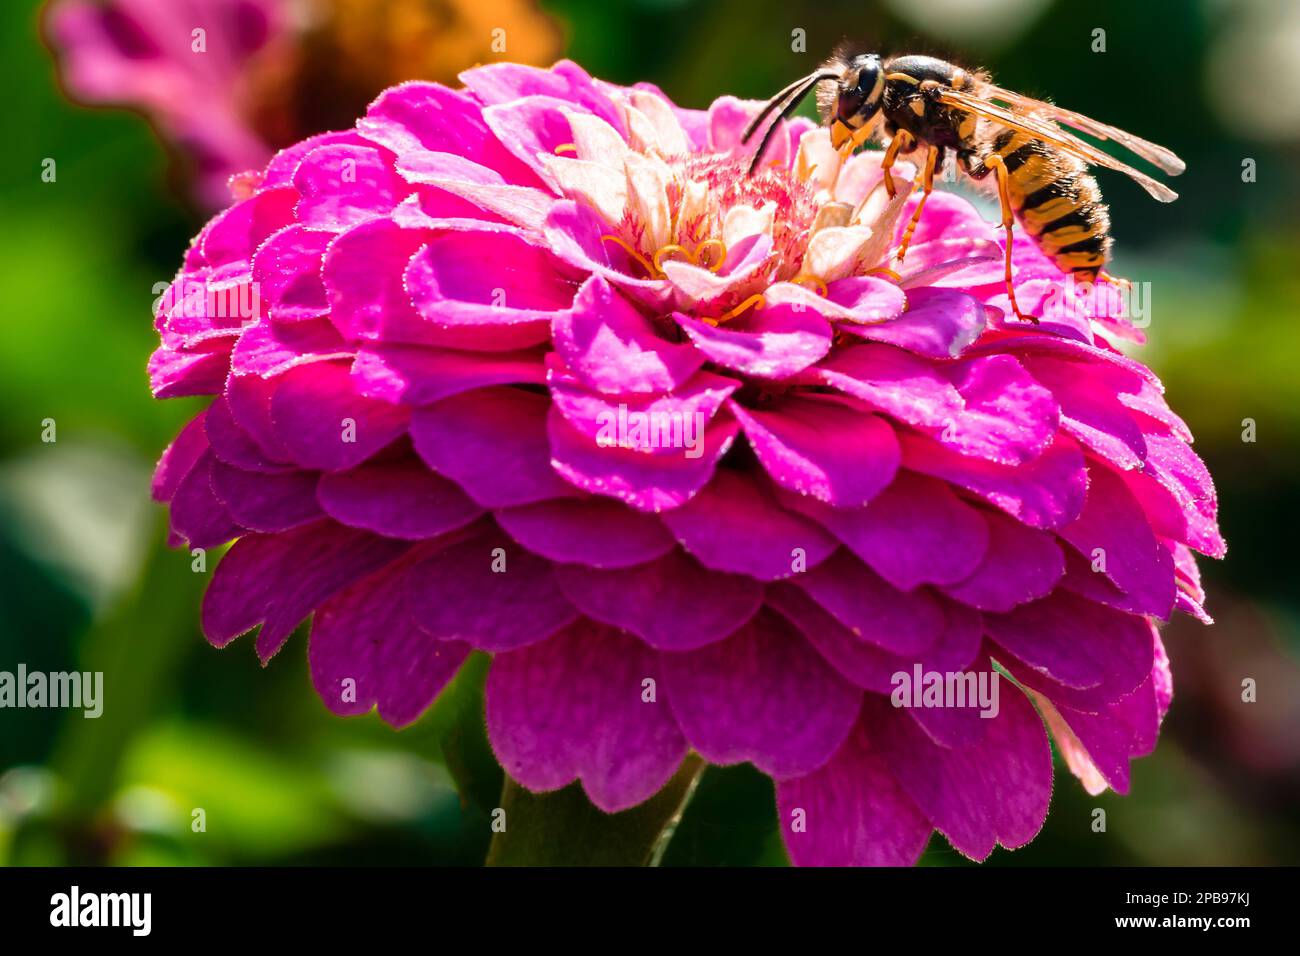 Close up of purple zinnia flower with a wasp. Photography with blurred garden background Stock Photo